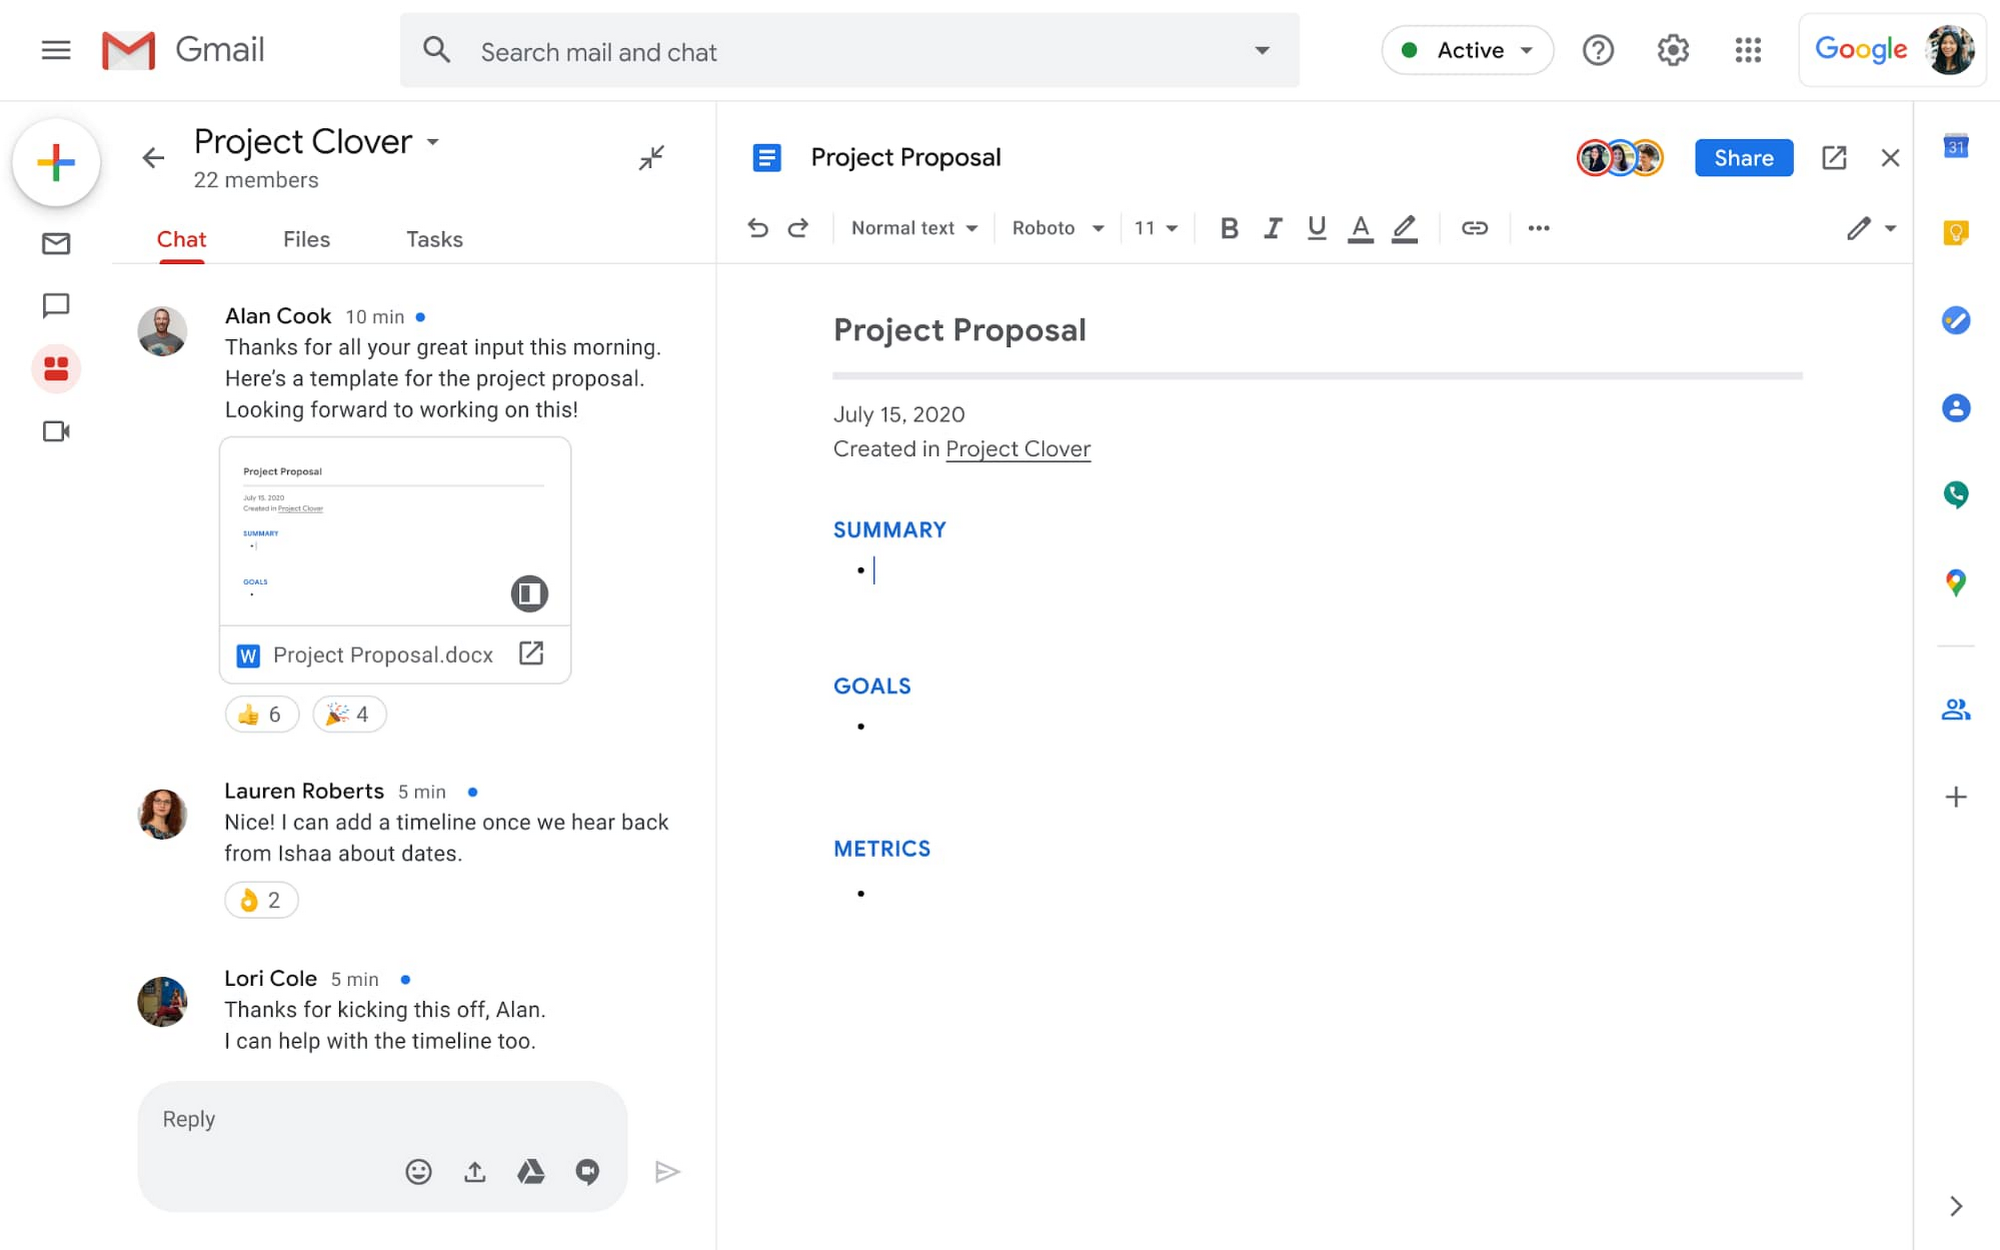 Google introduces your new home for work in G Suite 3_docs_side-by-side.max-2000x2000.png